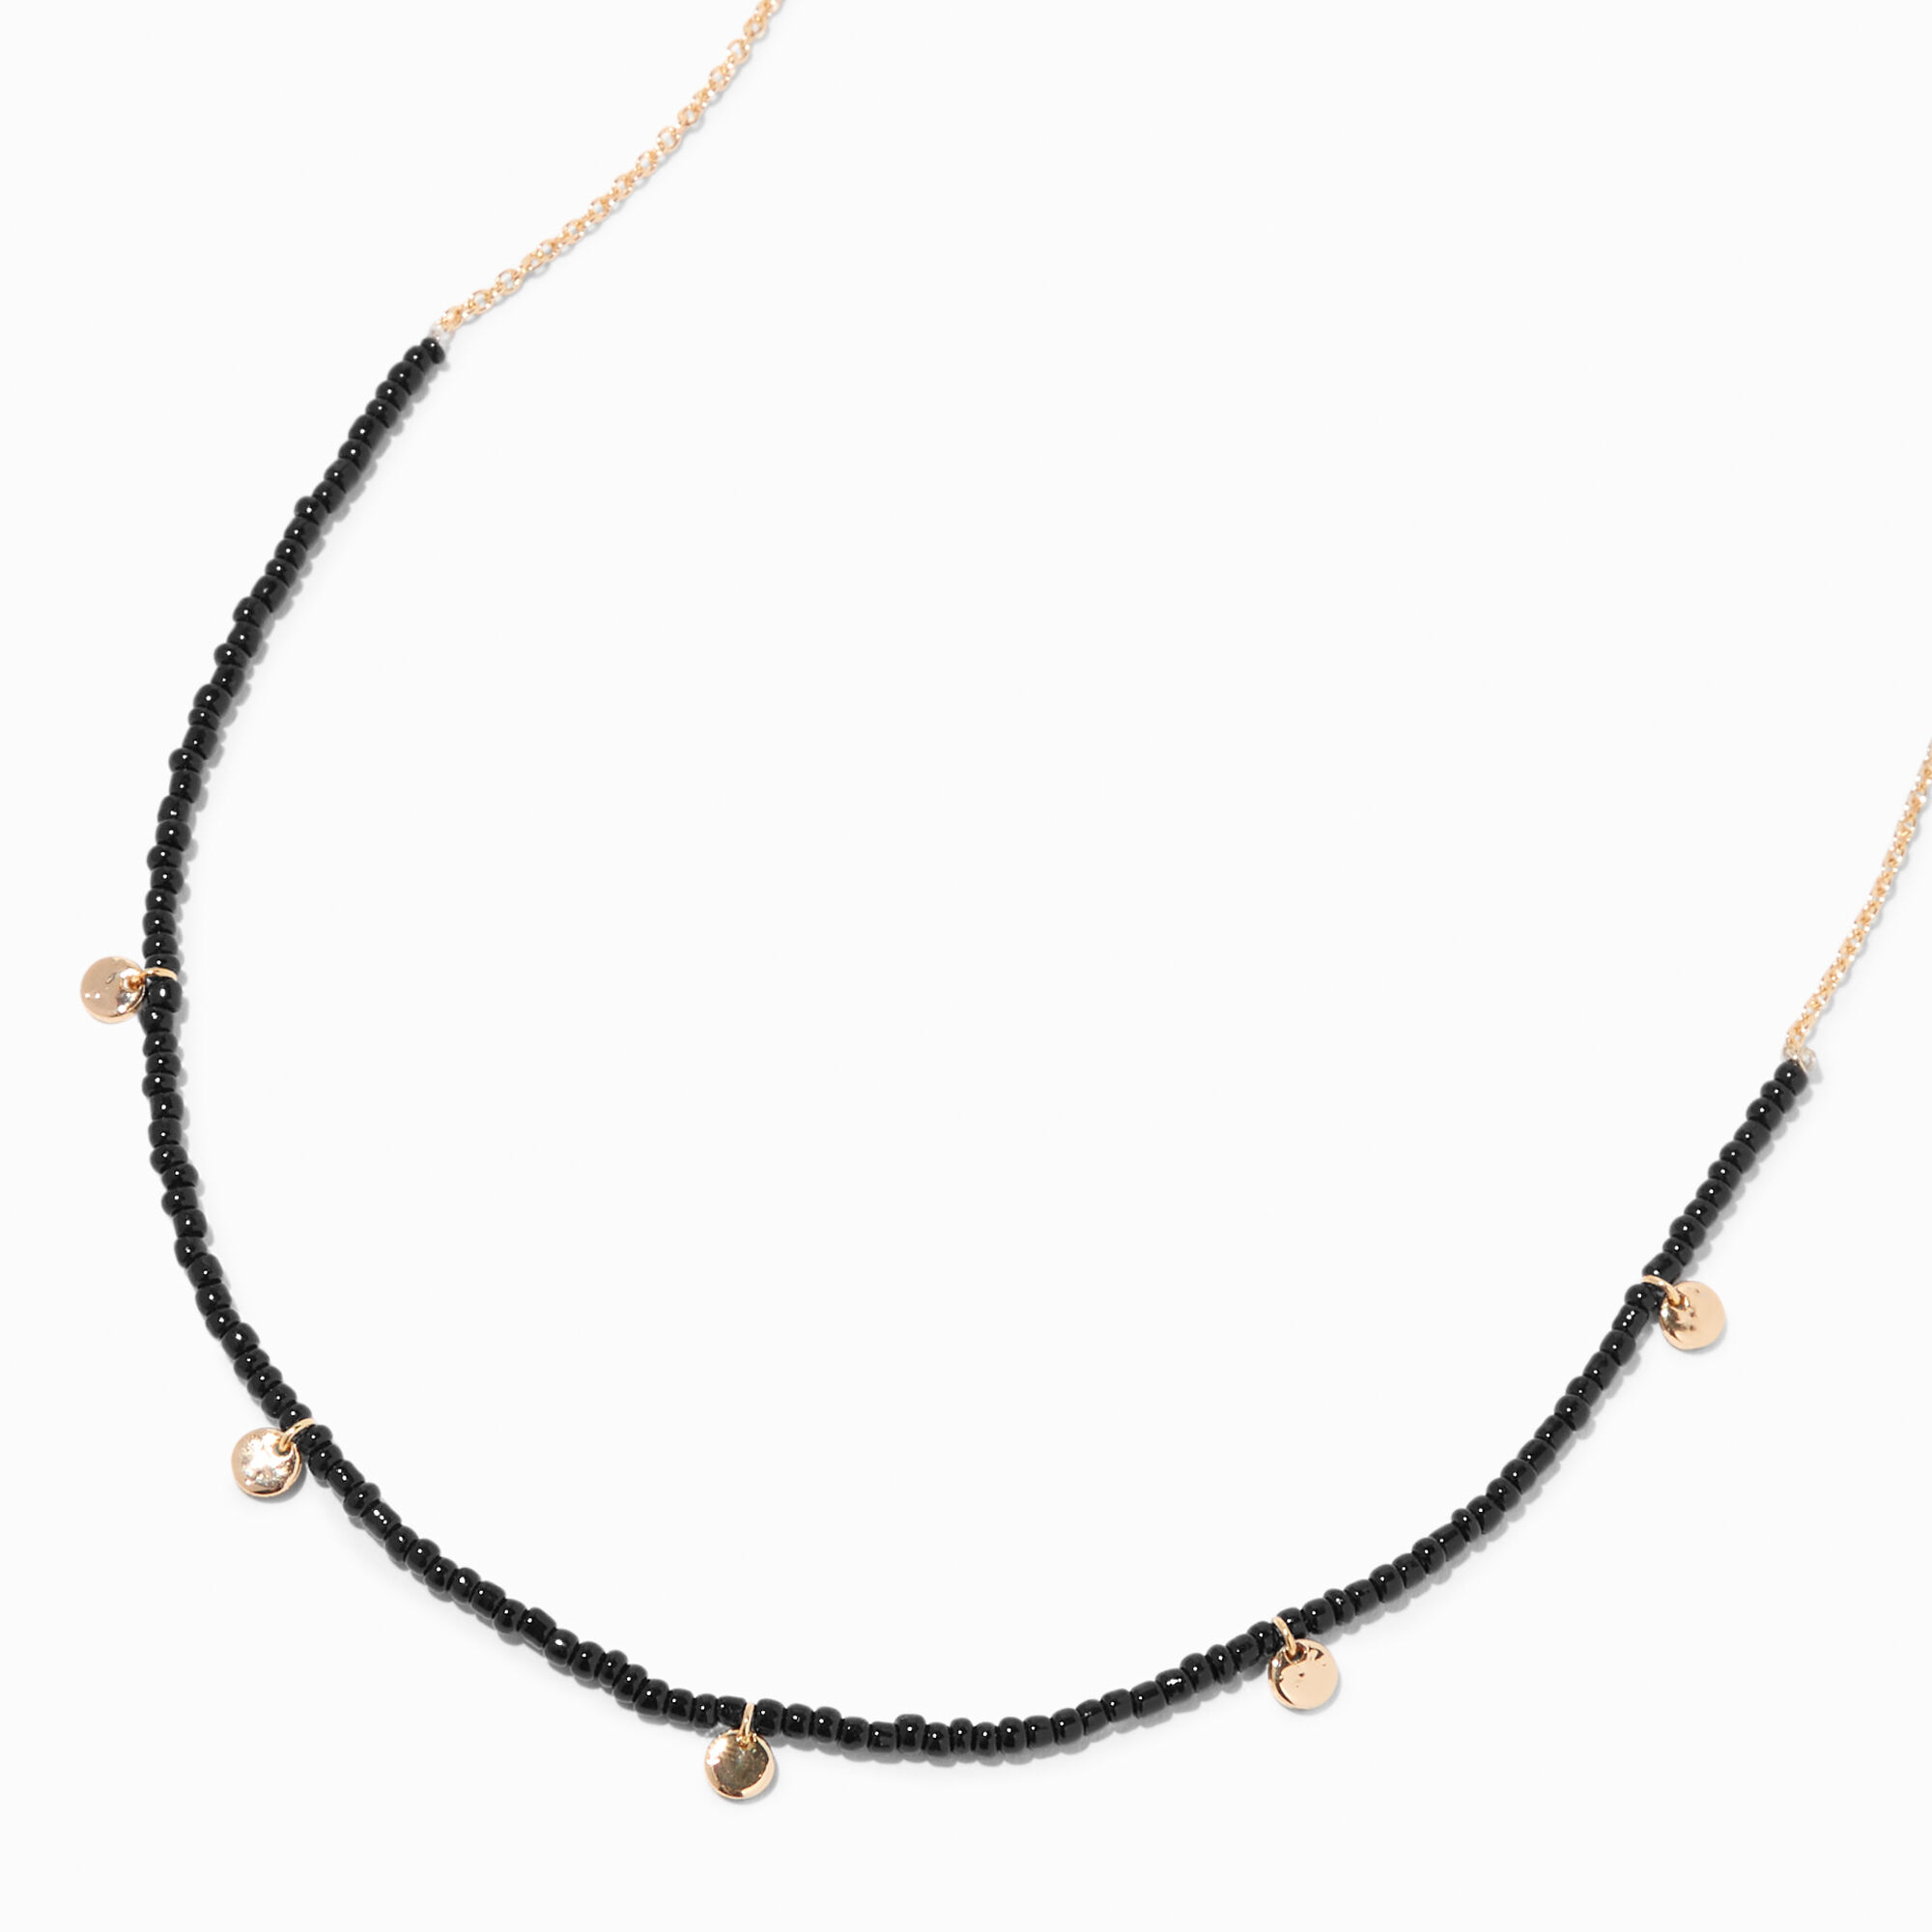 View Claires Sunray Disc Seed Bead Necklace Black information